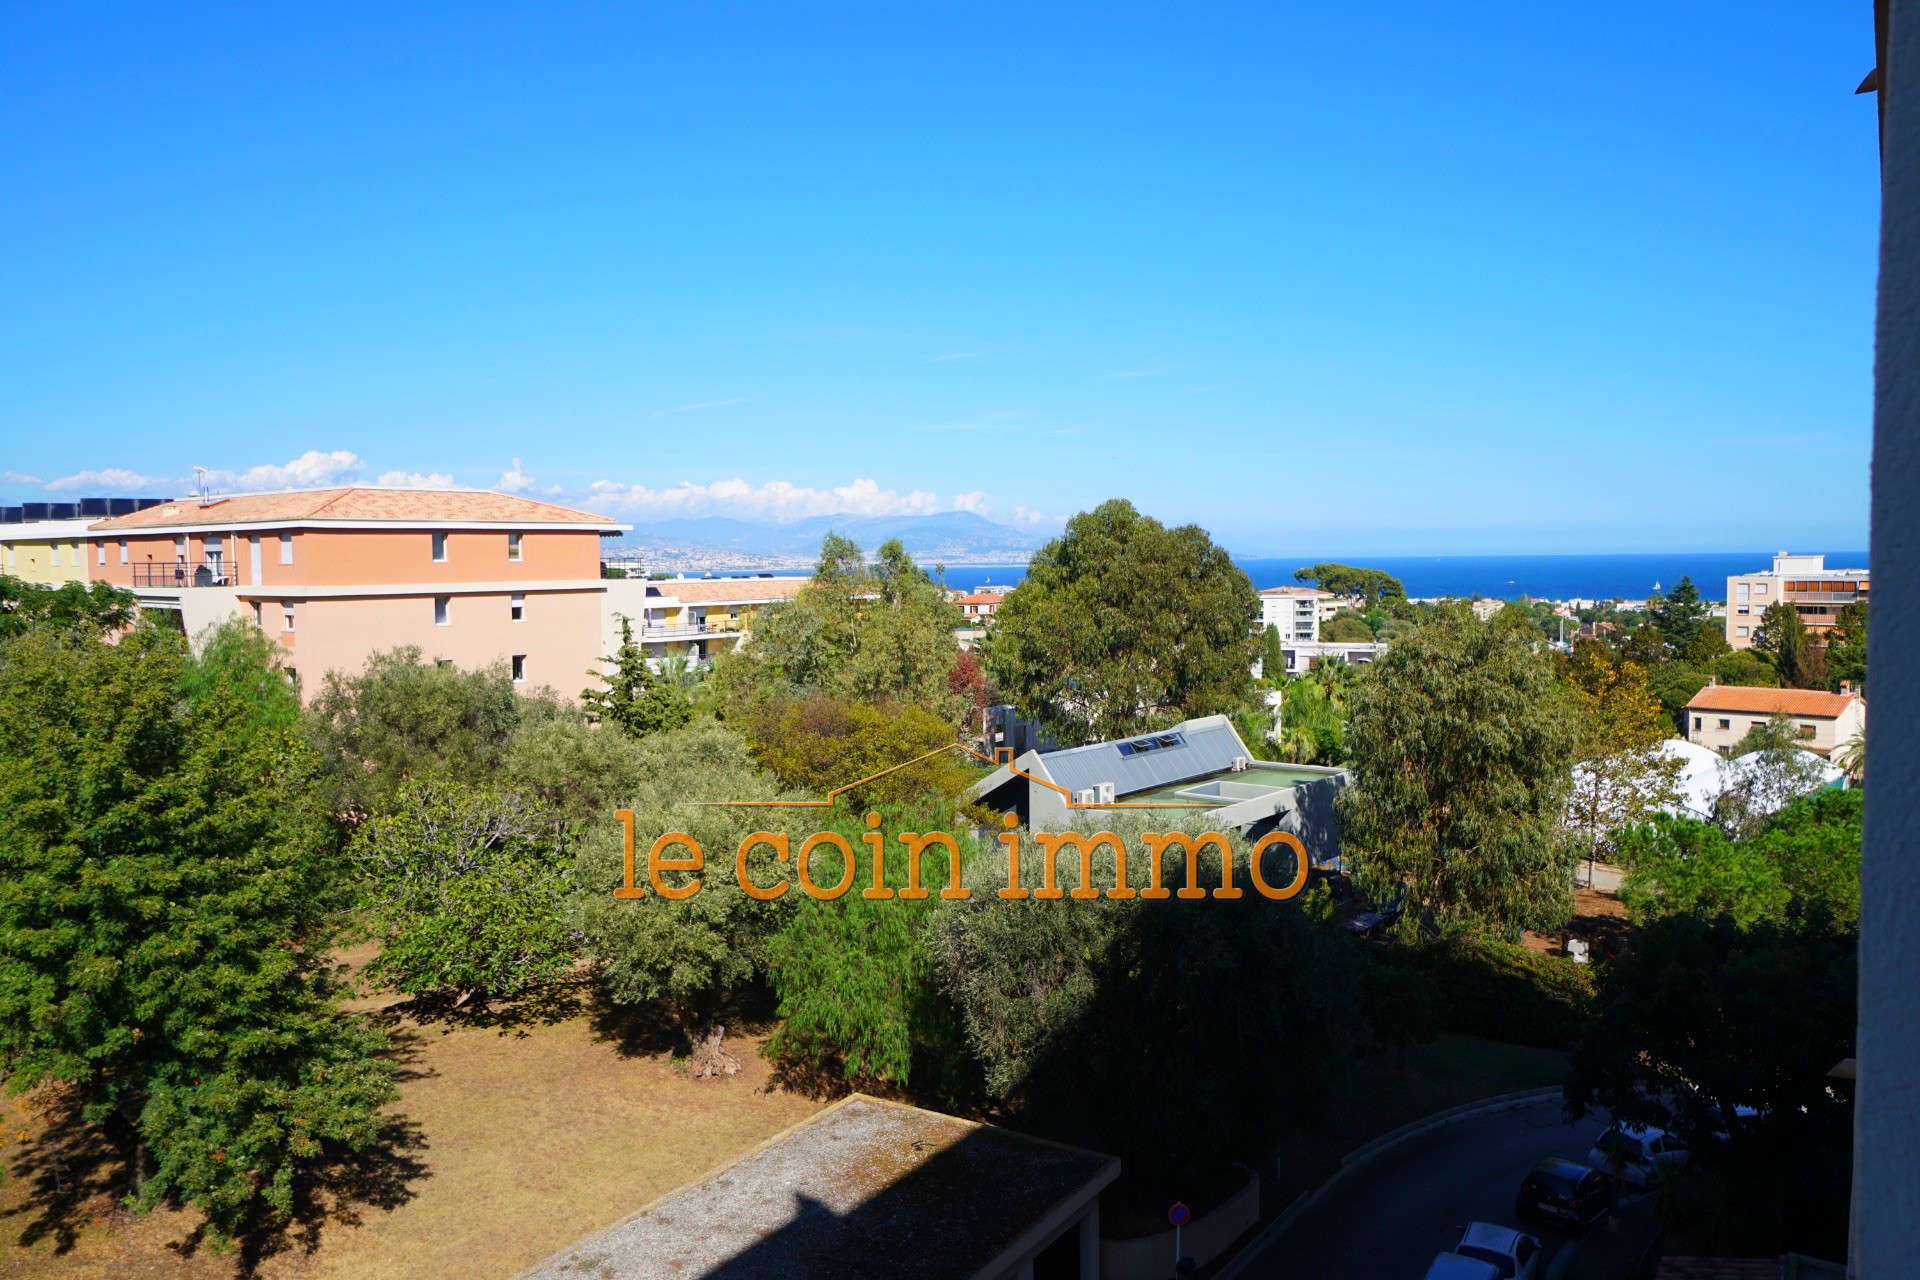 Vente Appartement 68m² à Antibes (06600) - Le Coin Immo